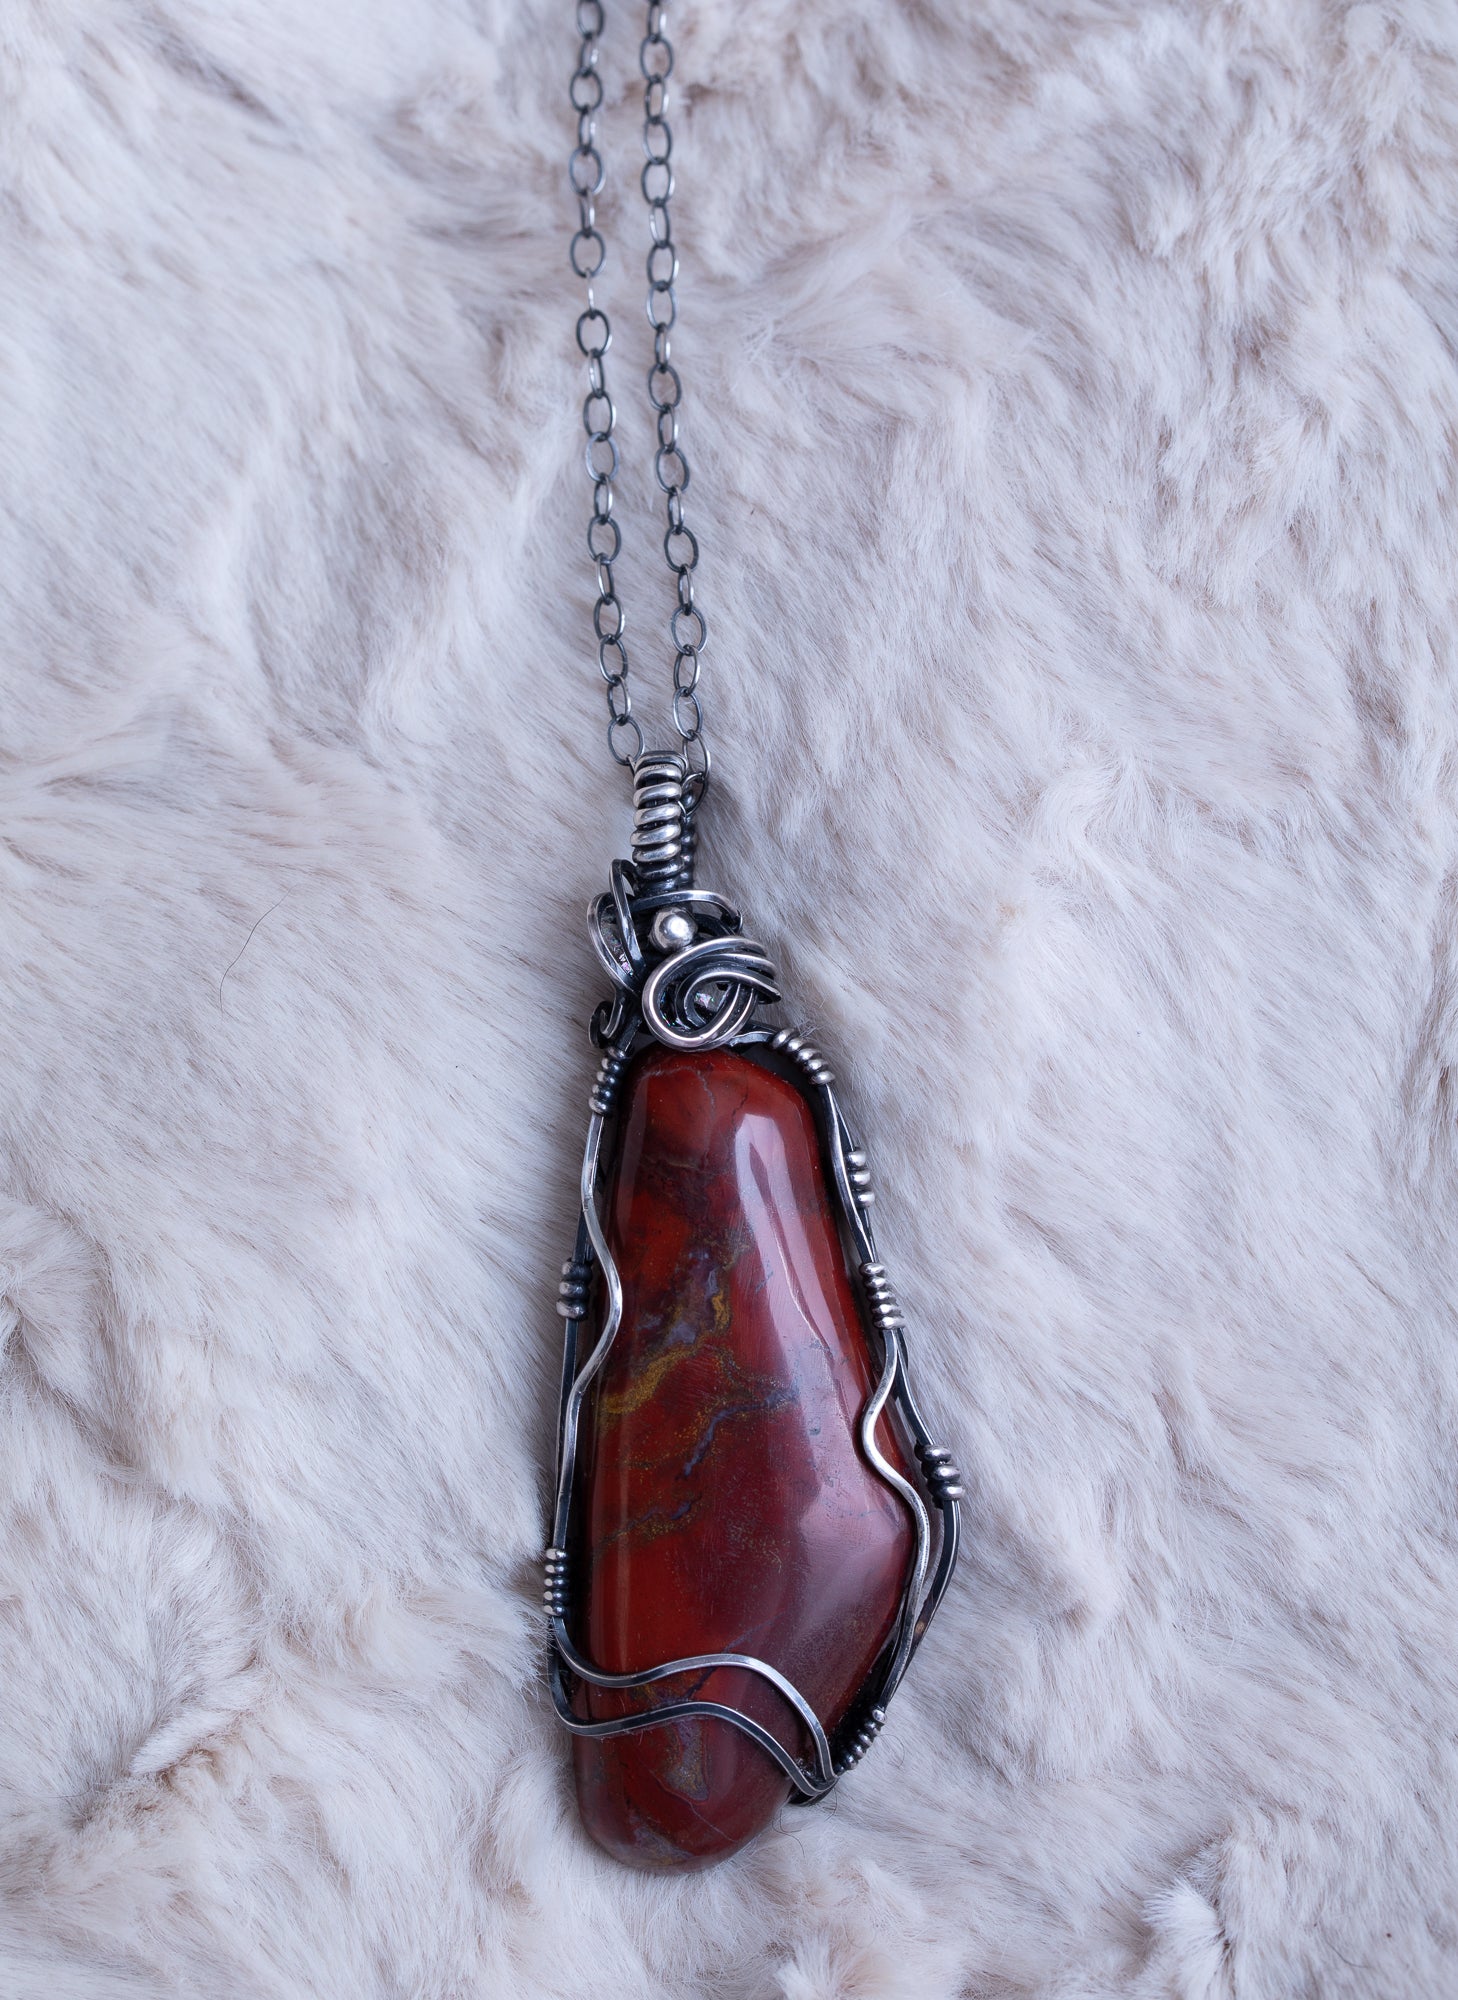 Red Petrified Wood Sterling Silver Wire Wrap Pendant - One of a Kind